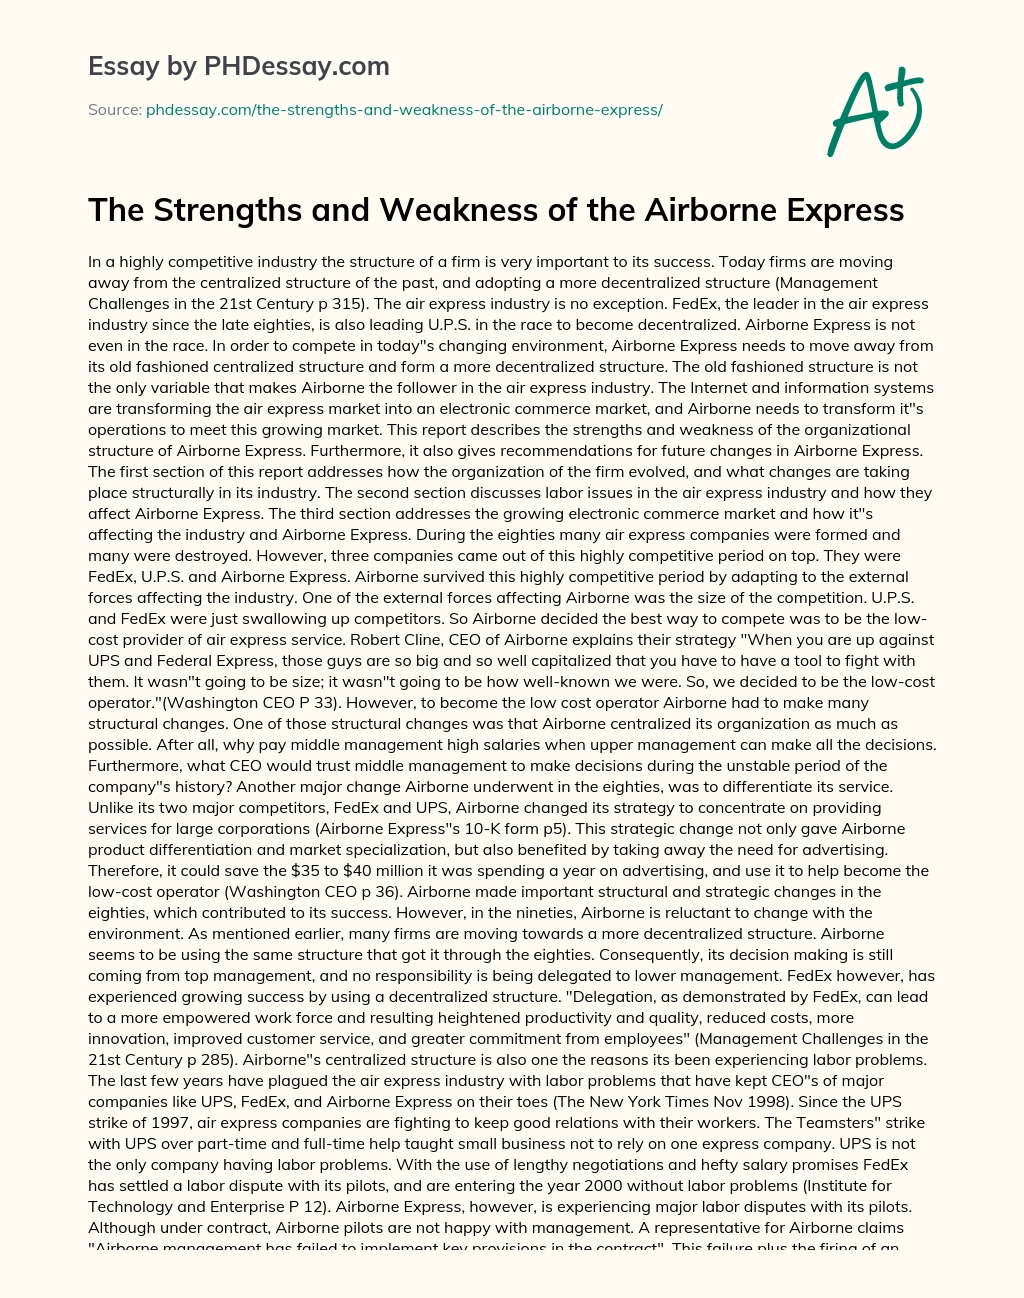 The Strengths and Weakness of the Airborne Express essay